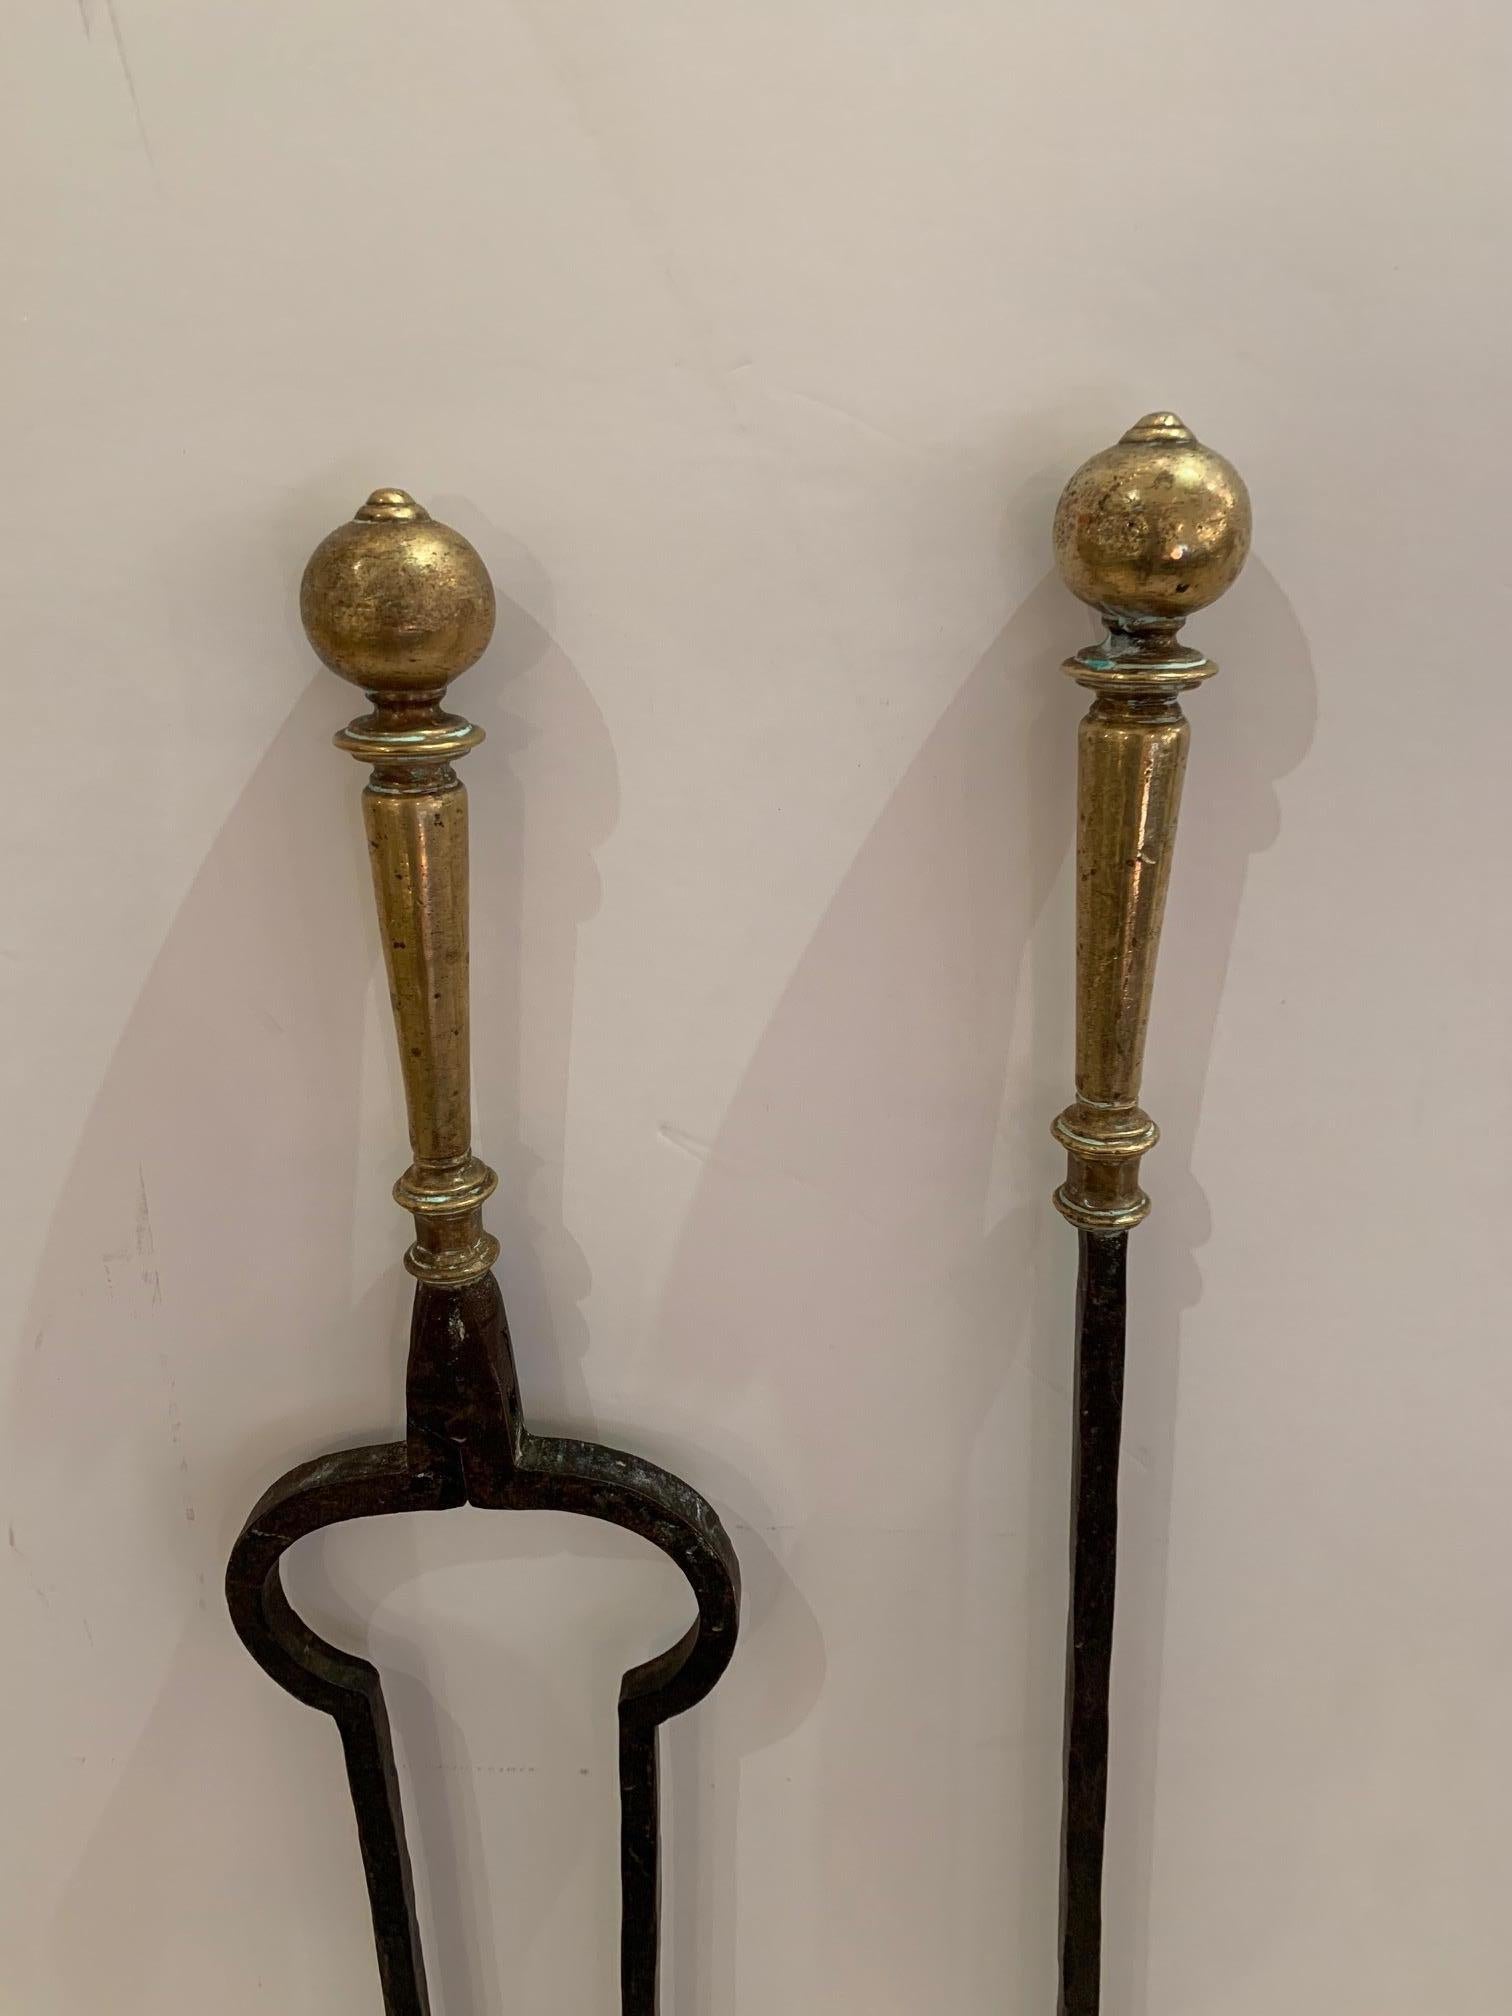 A handsome set of black hand forged iron fireplace tools with brass handles.
Measures: Fork 32.75” H x 4.25” W x 2” D
Tongs 32” H x 4.75” W x 2.5” D
Brush 26.75” H x 3” W 2.5” D.
 